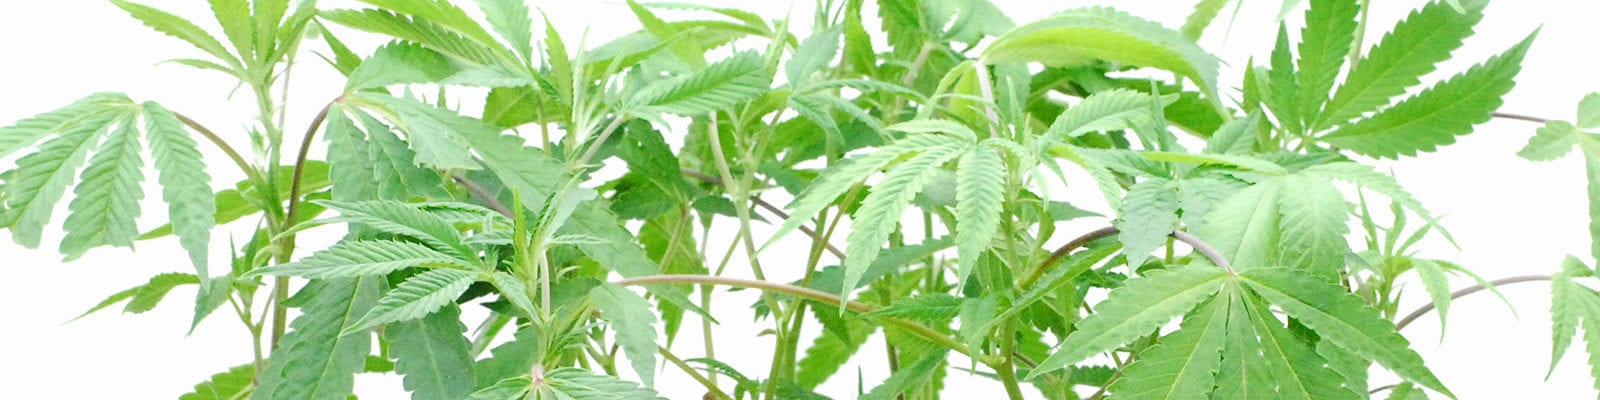 A jumble of young cannabis plants before a white background.